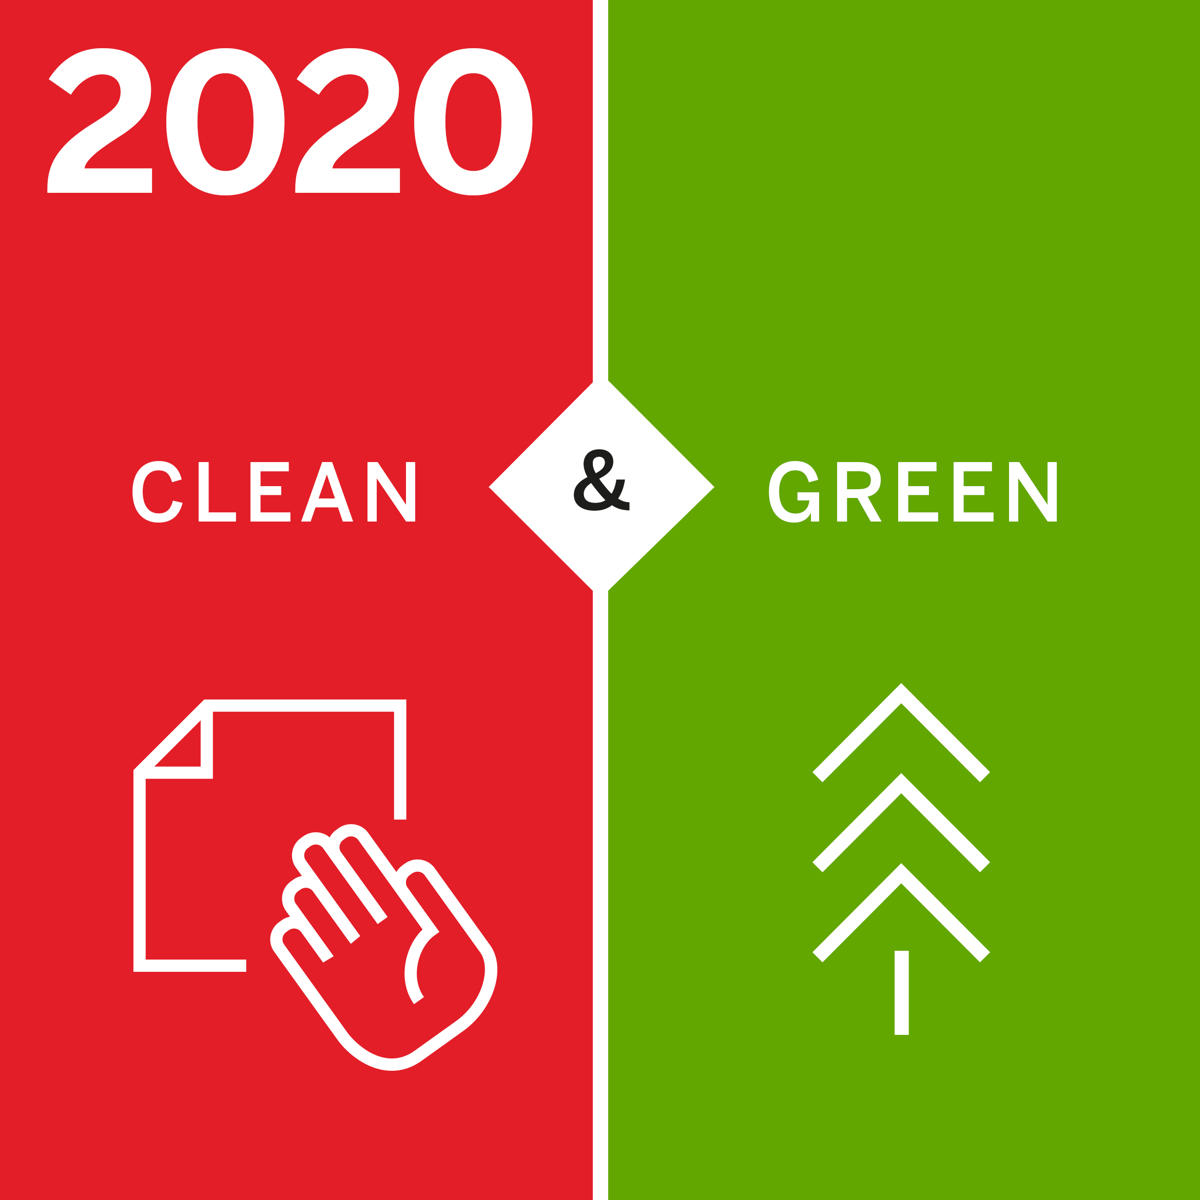 Clean & Green concept is born